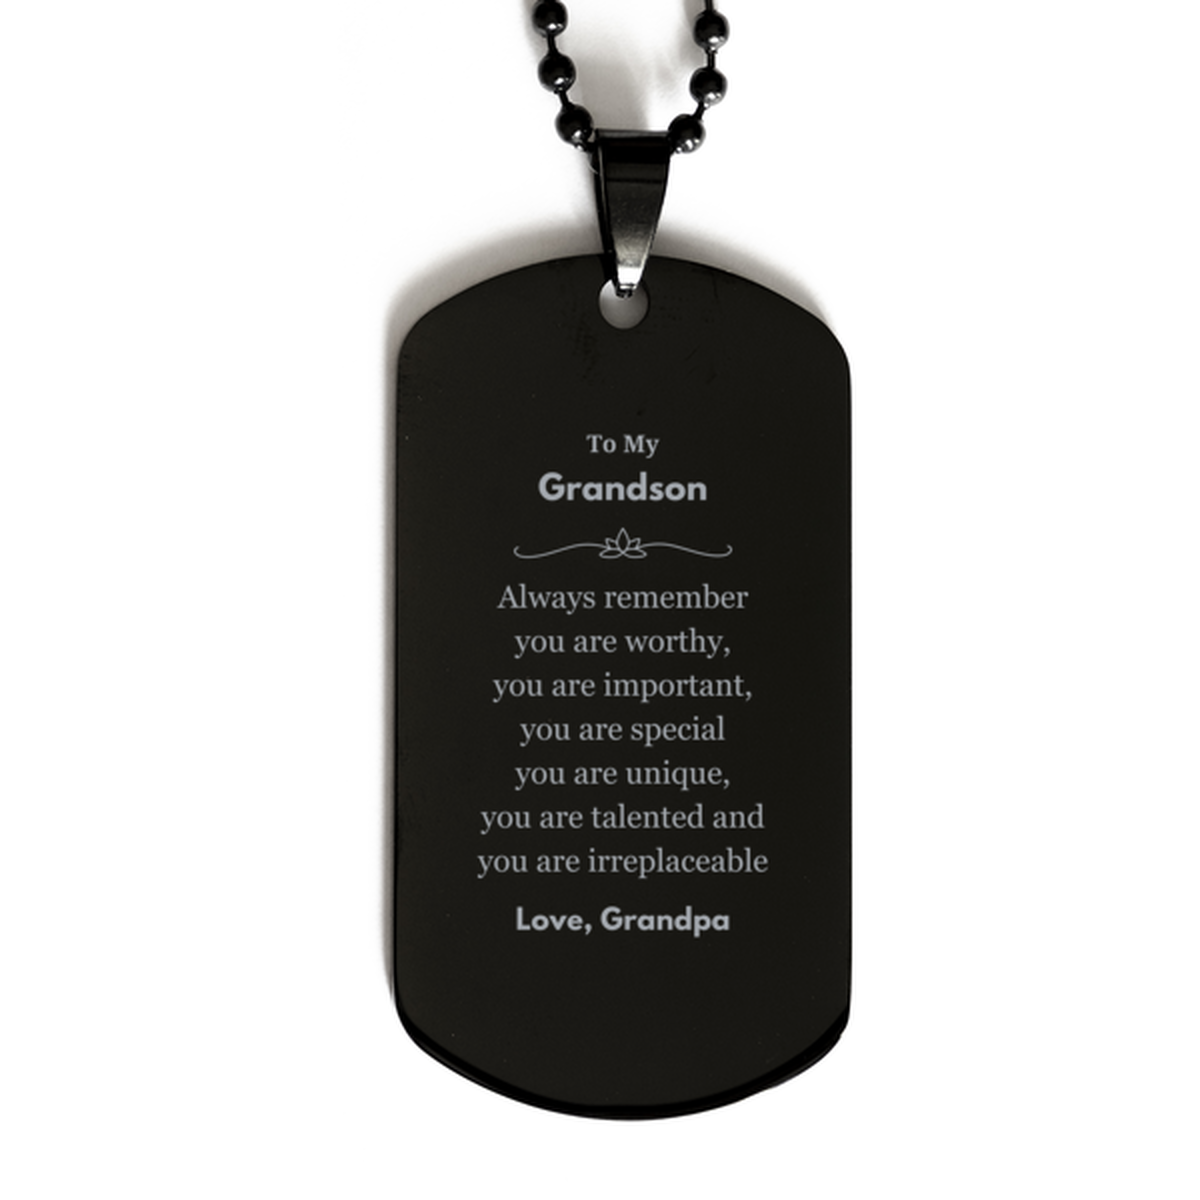 Grandson Birthday Gifts from Grandpa, Inspirational Black Dog Tag for Grandson Christmas Graduation Gifts for Grandson Always remember you are worthy, you are important. Love, Grandpa